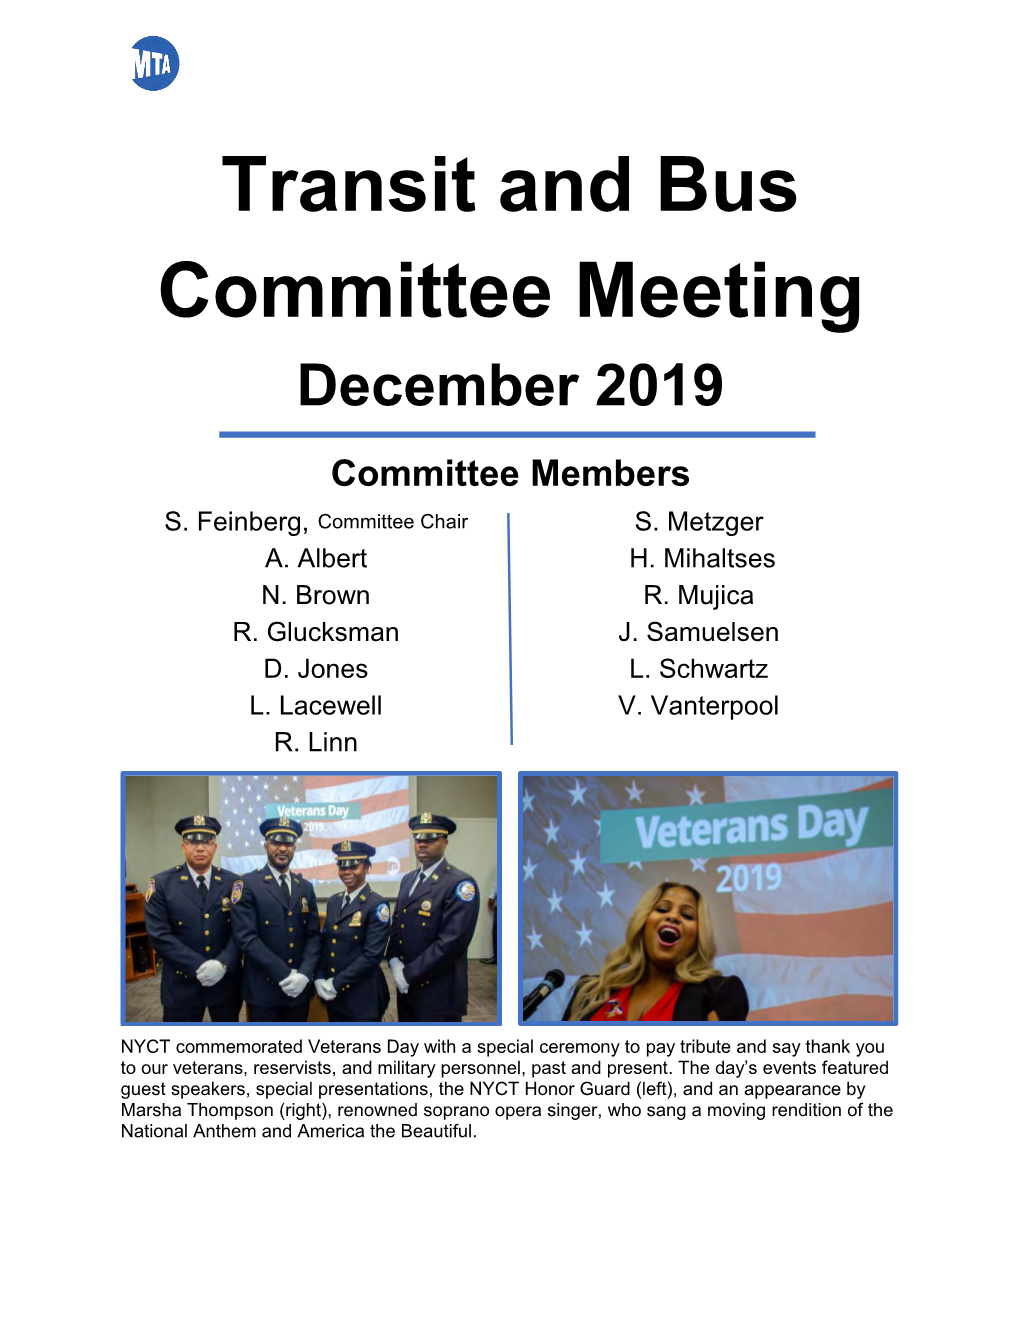 Transit and Bus Committee Meeting December 2019